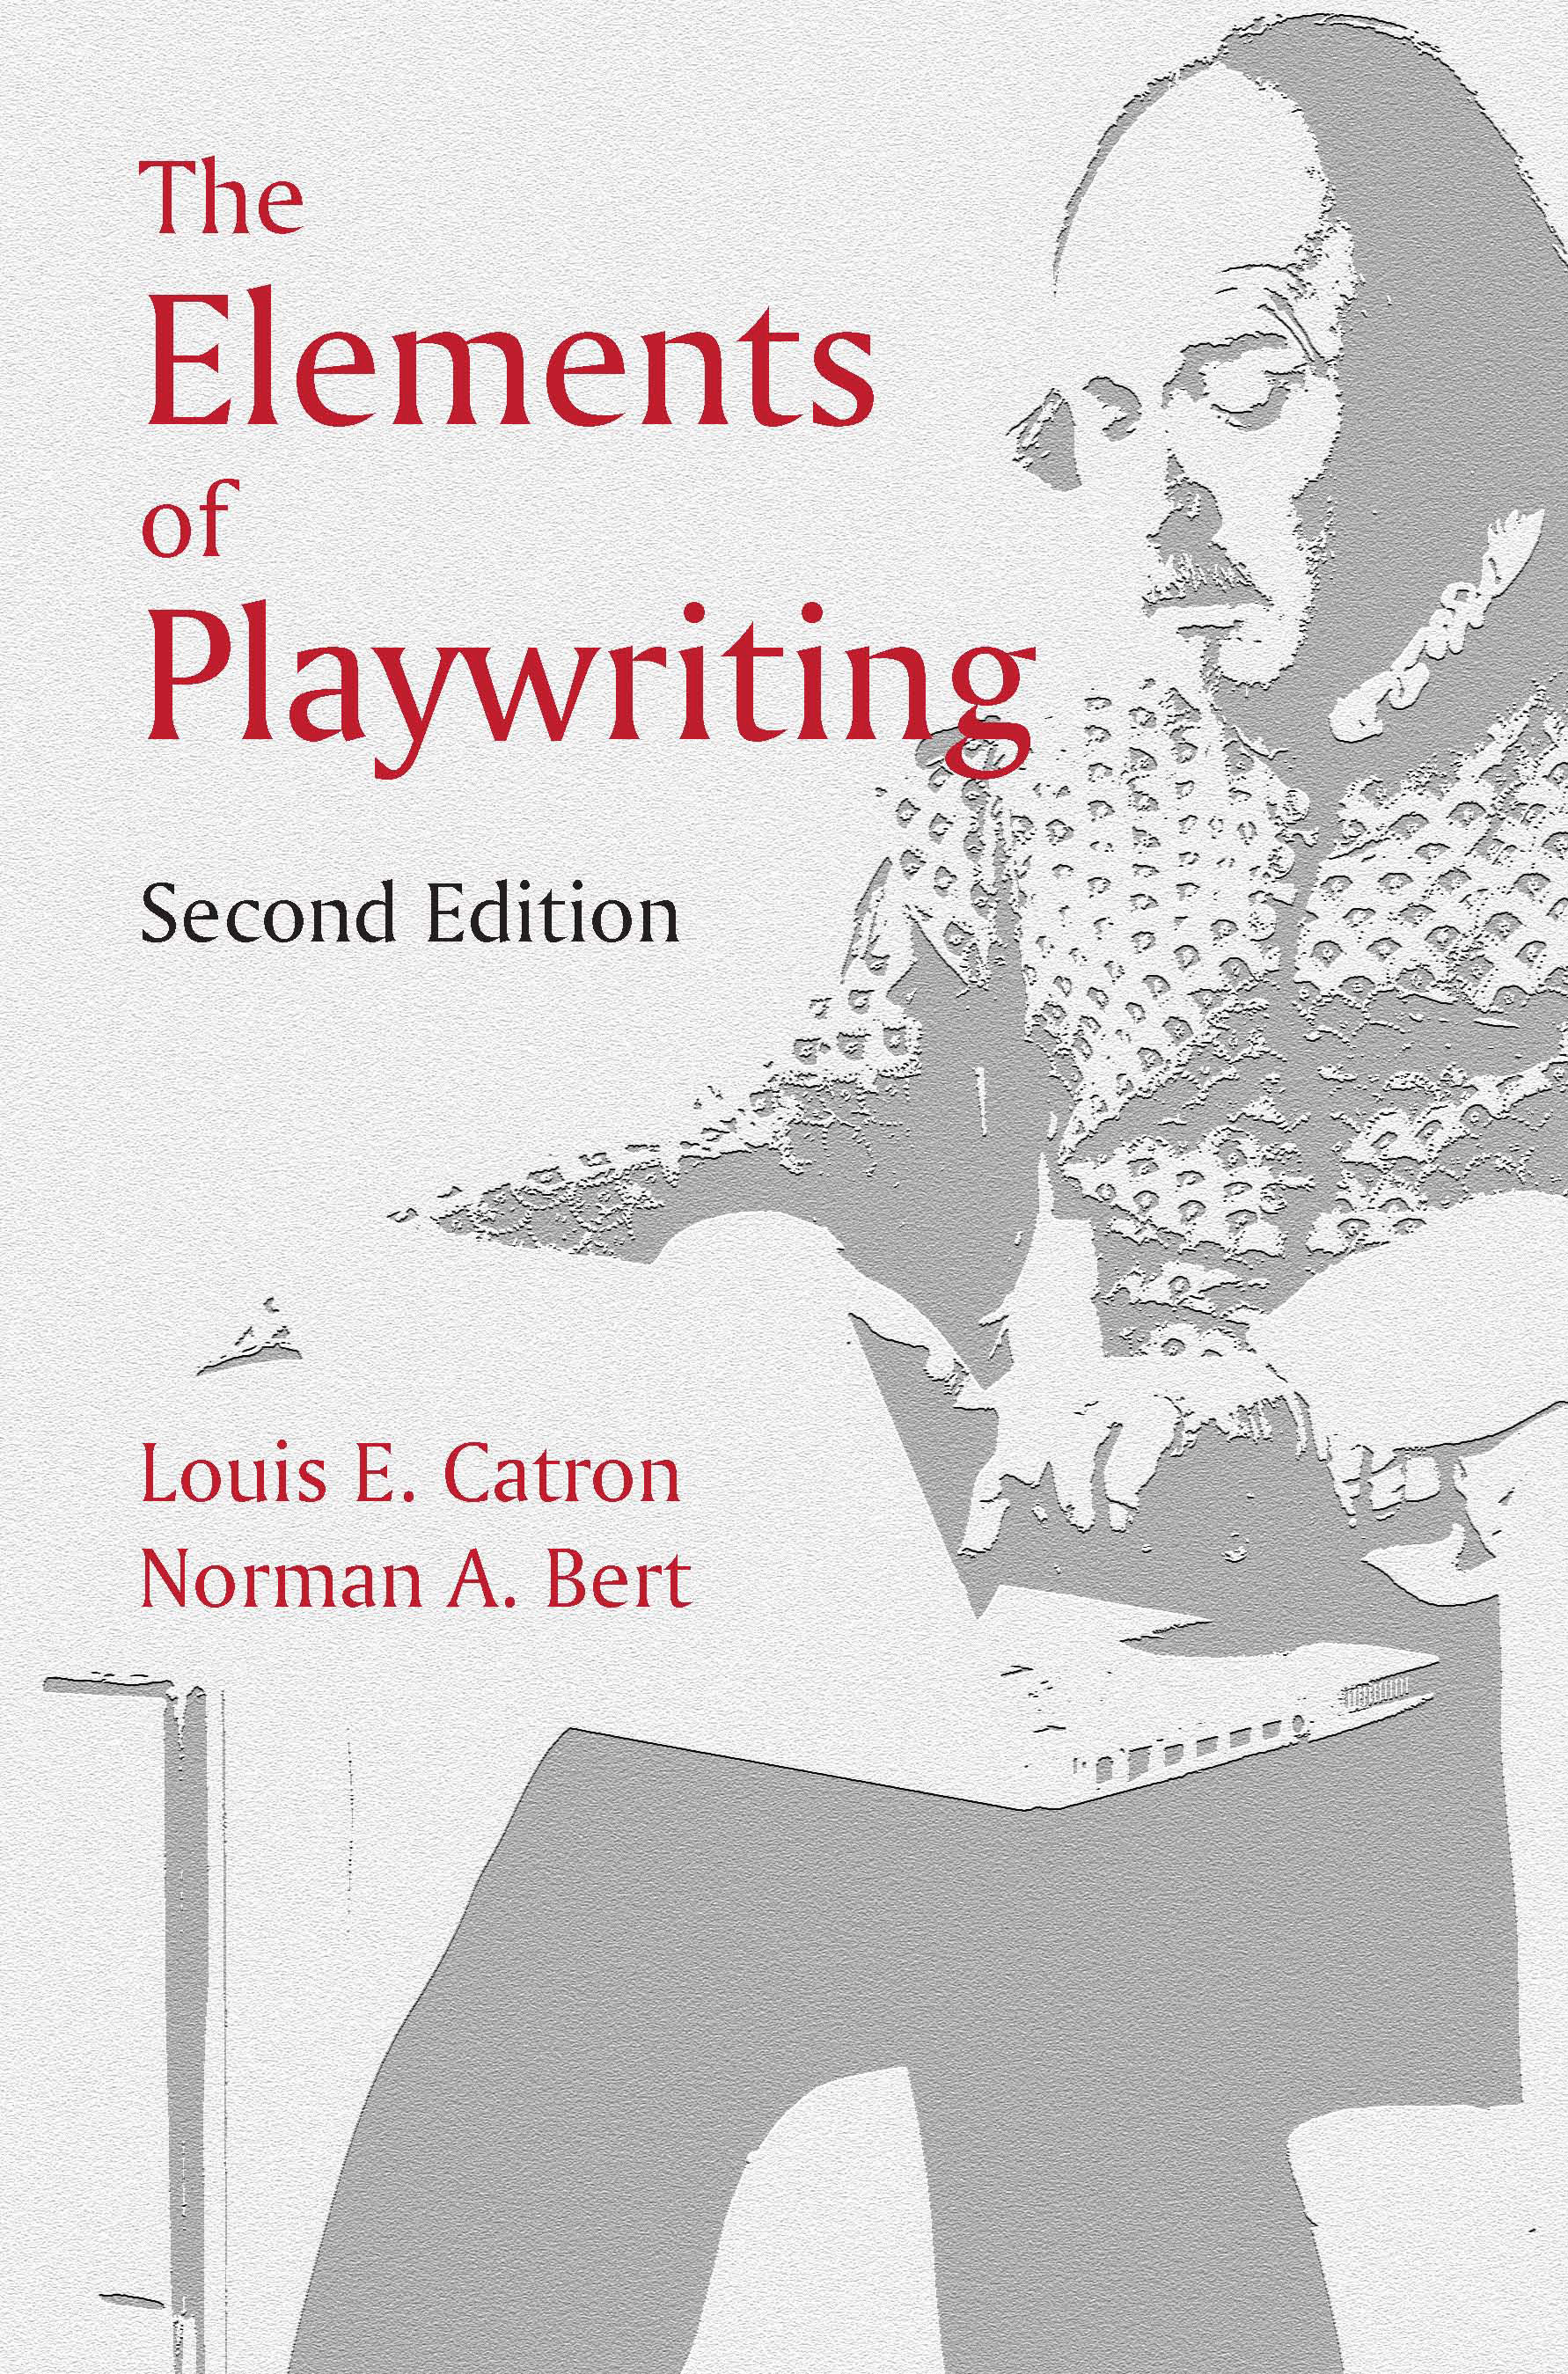 The Elements of Playwriting:  by Louis E. Catron, Norman A. Bert